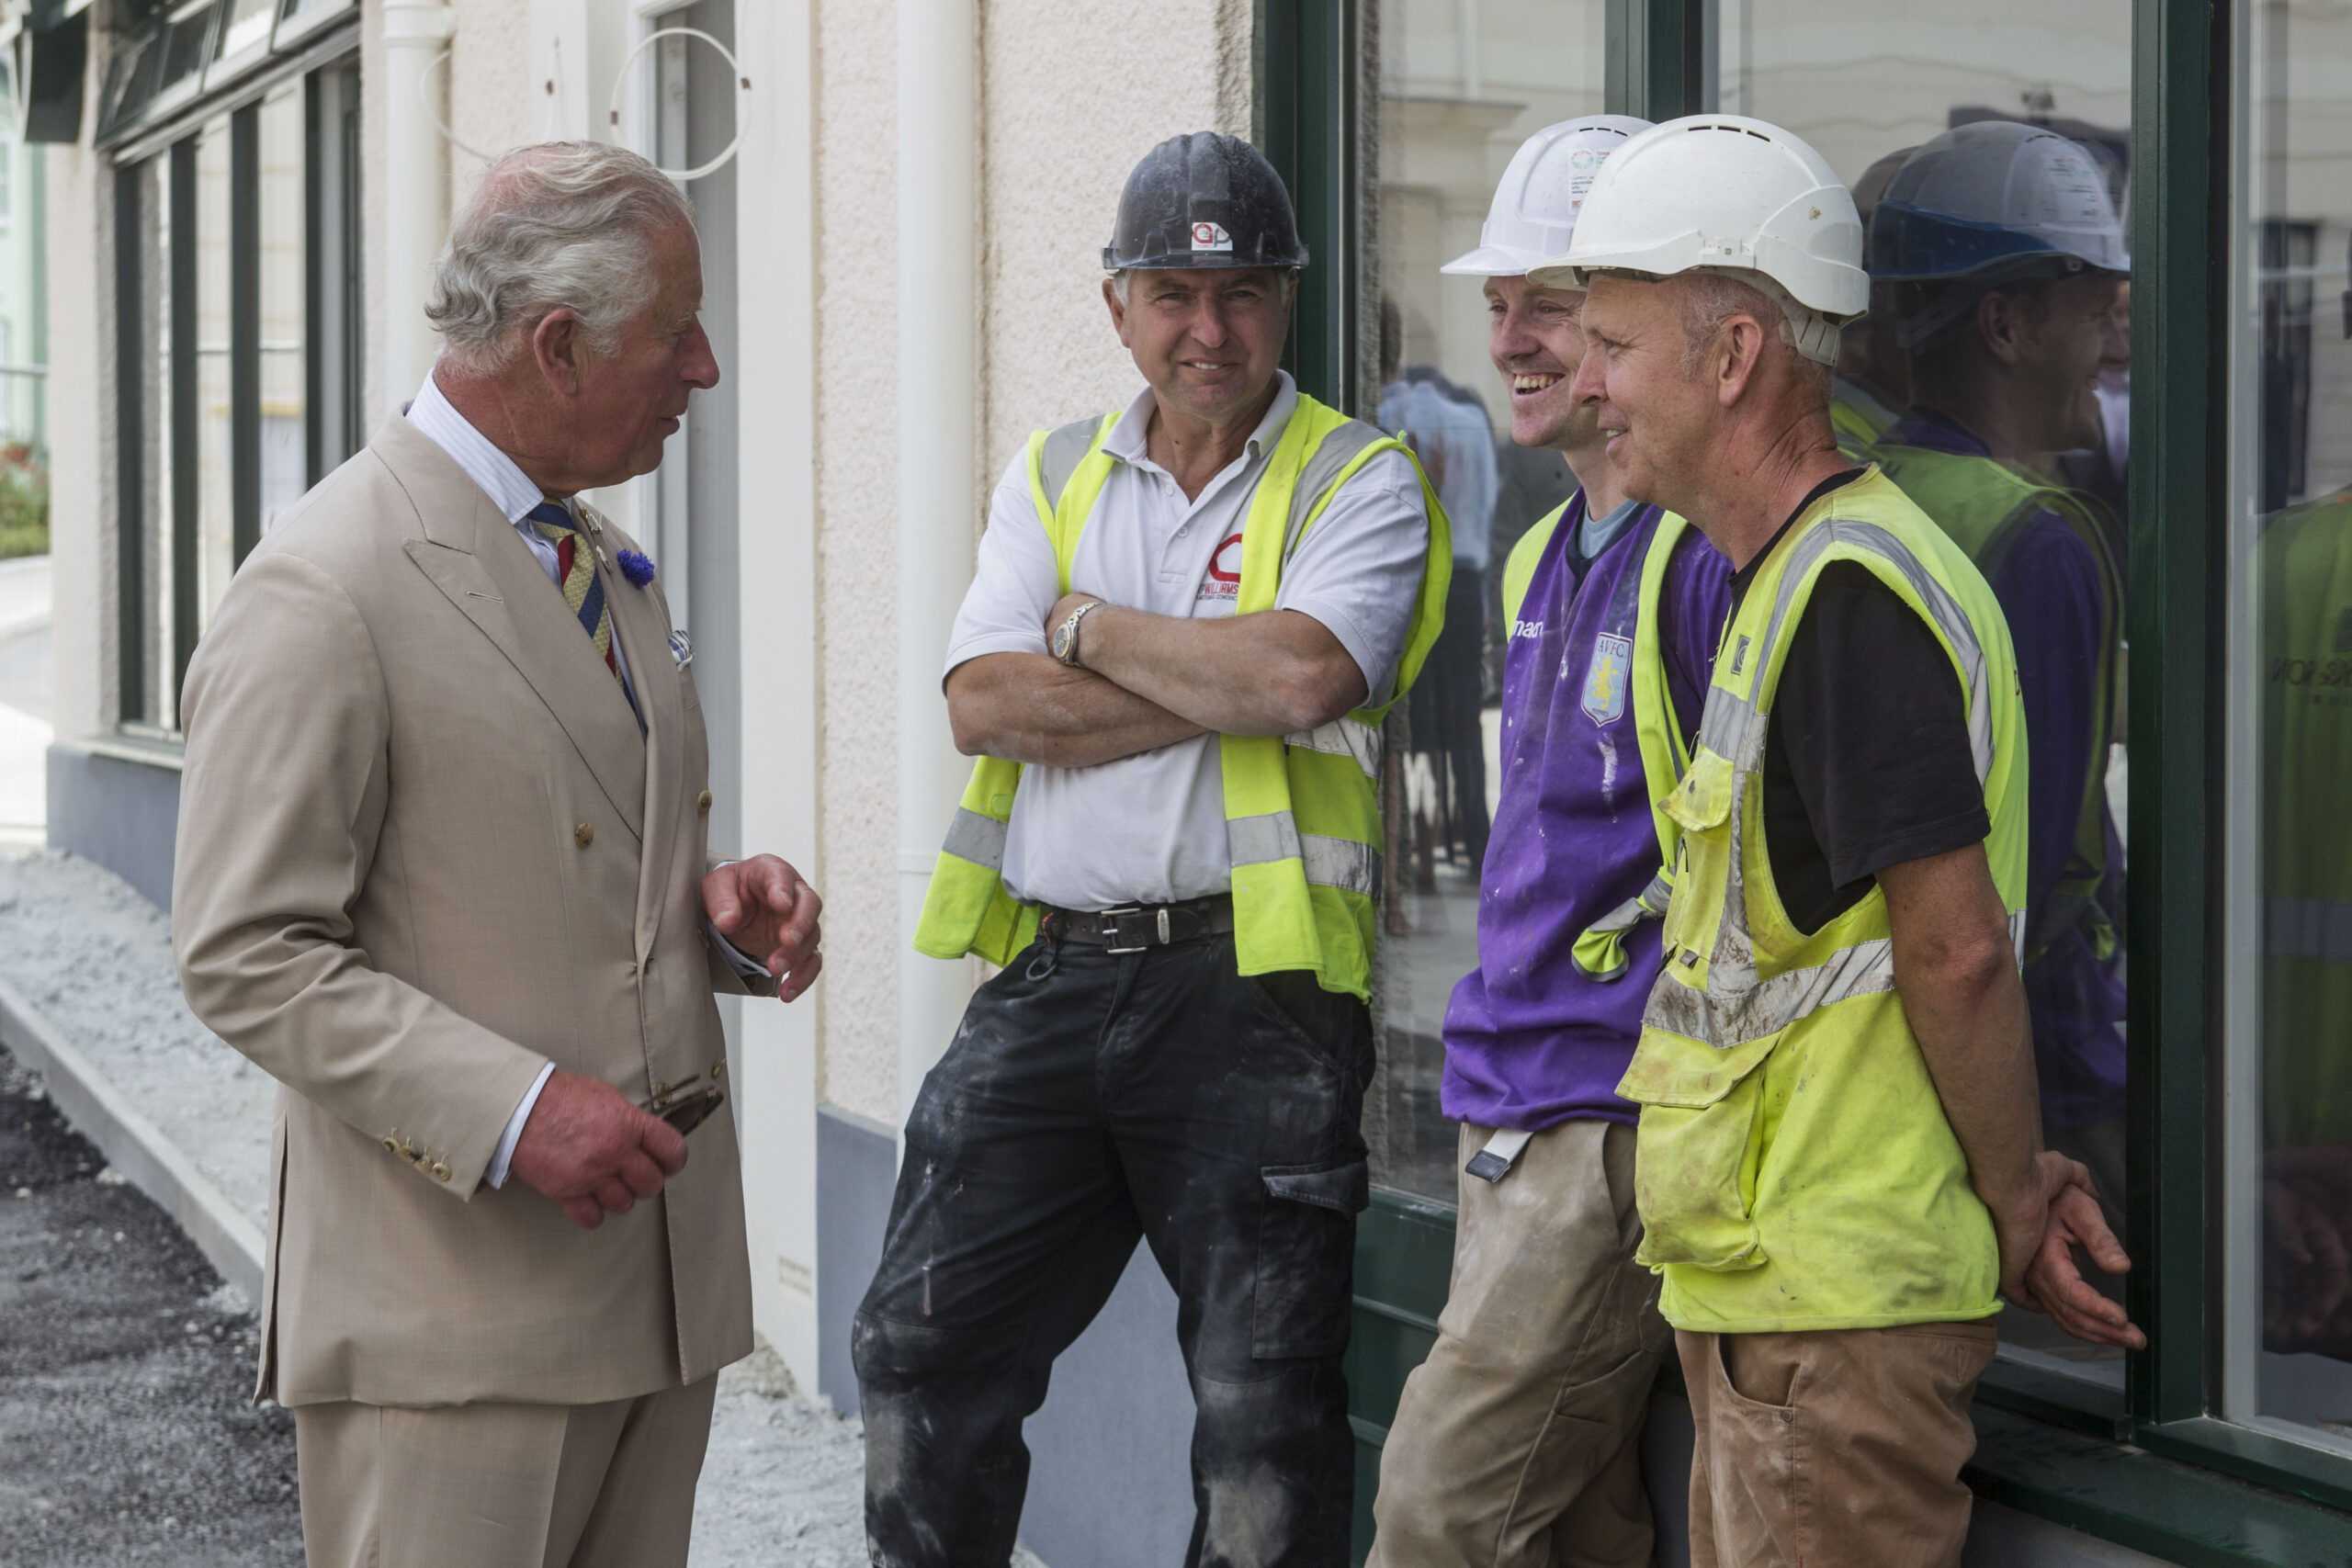 HRH meeting contractors scaled